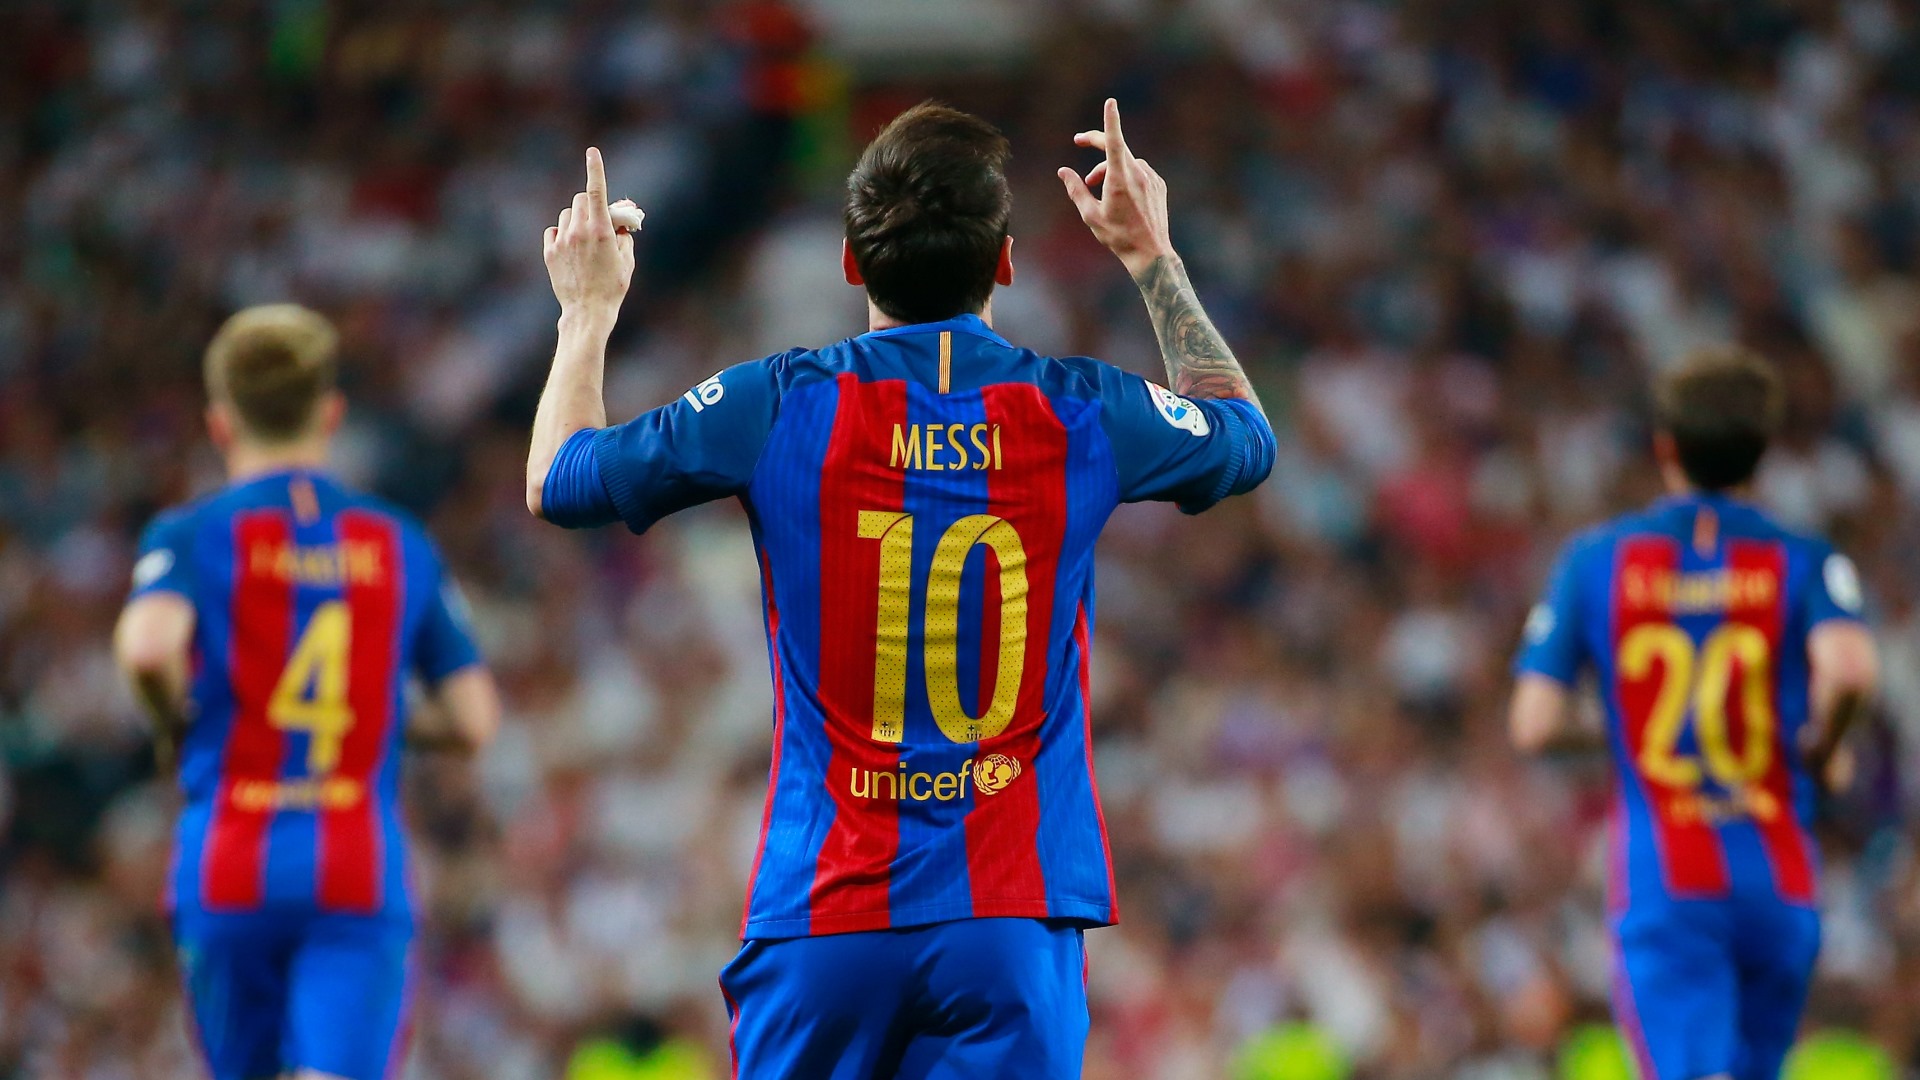 EL CLASICO: King Messi Destroys Madrid and Breaks Clasico Goals Record